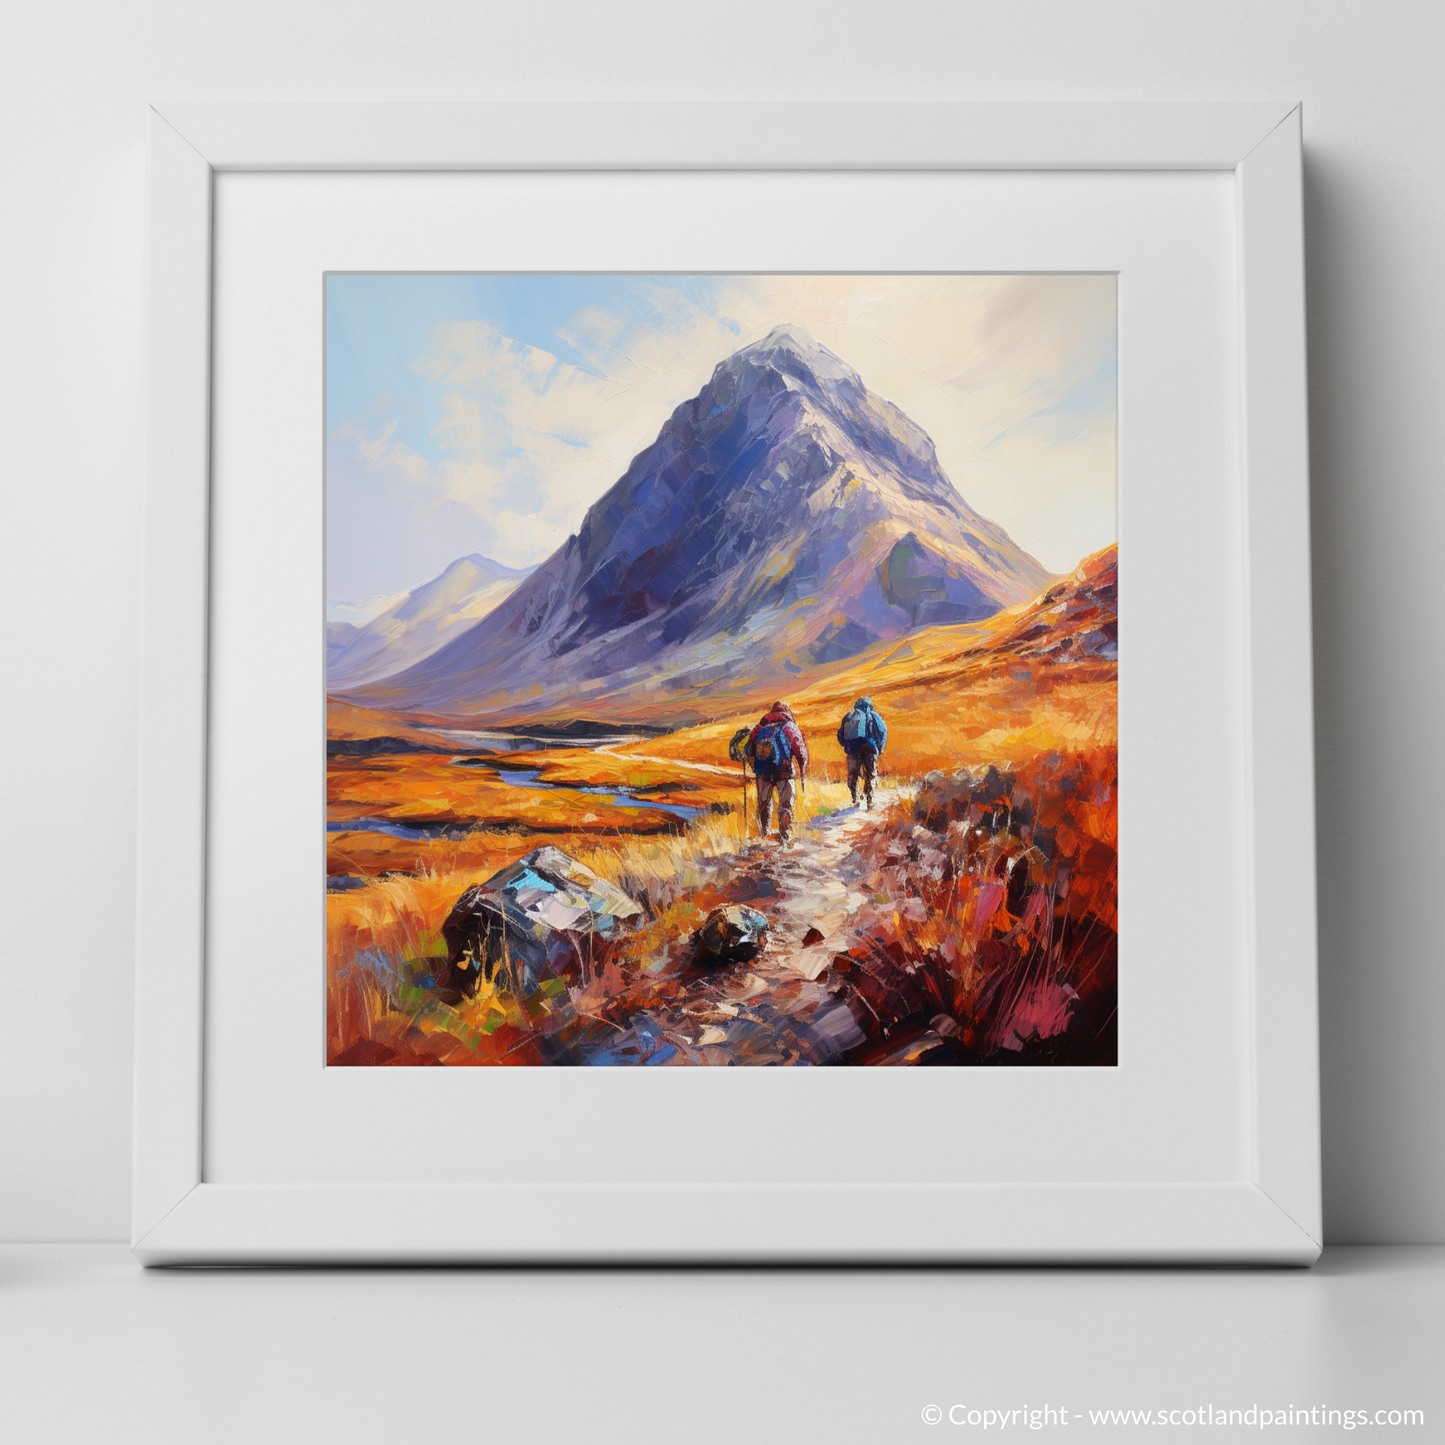 Hikers' Journey to Buachaille Summit at Golden Hour